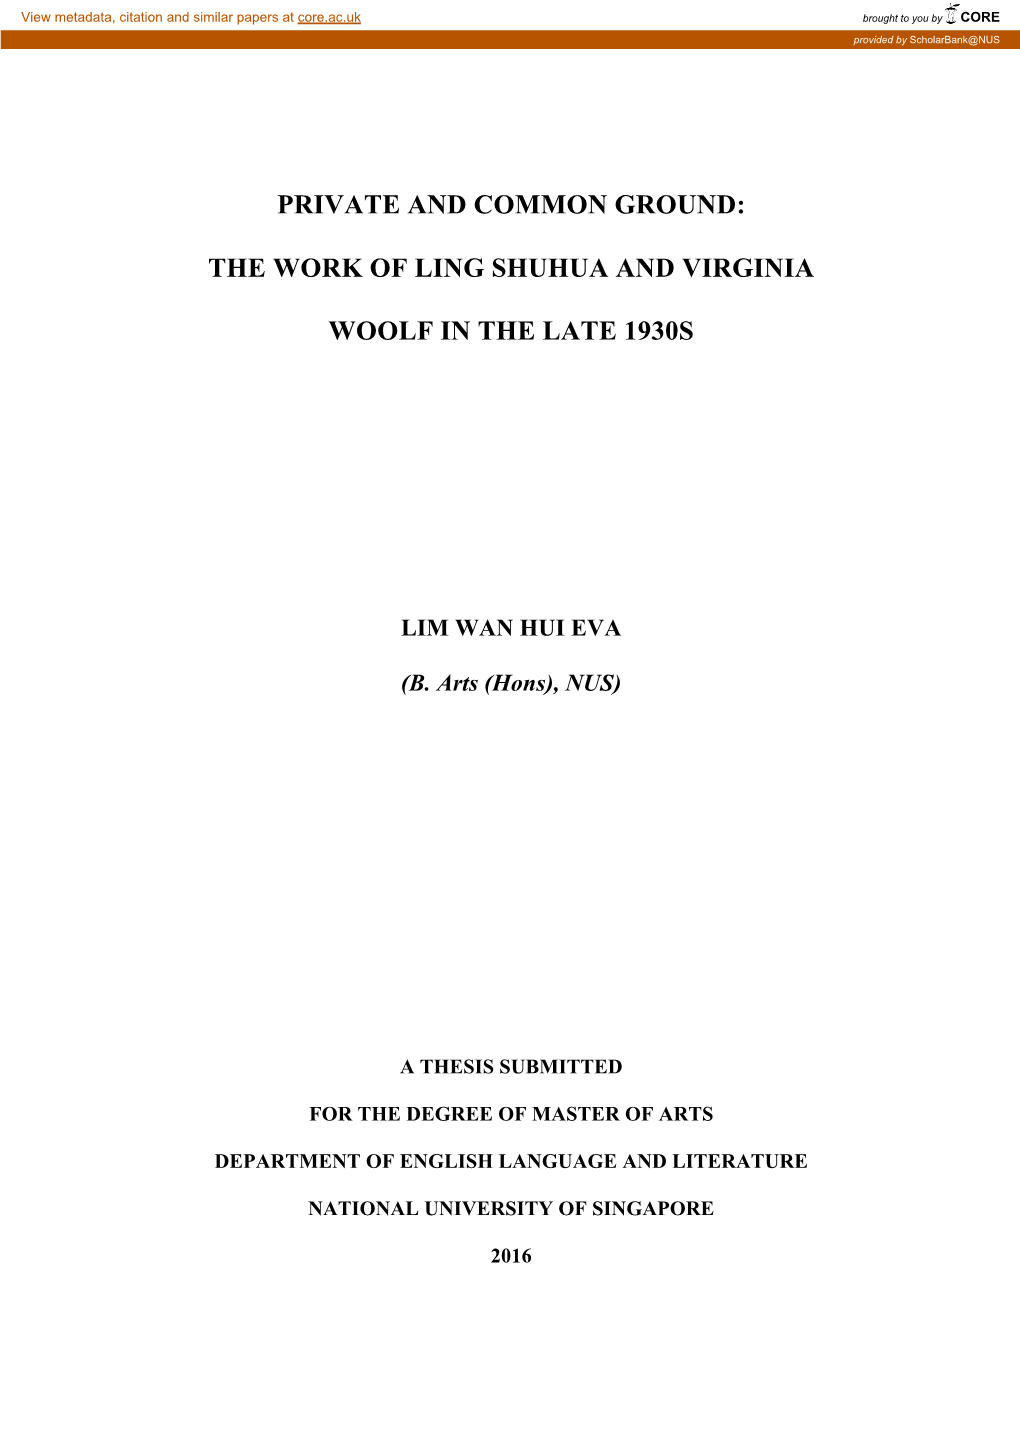 The Work of Ling Shuhua and Virginia Woolf in The